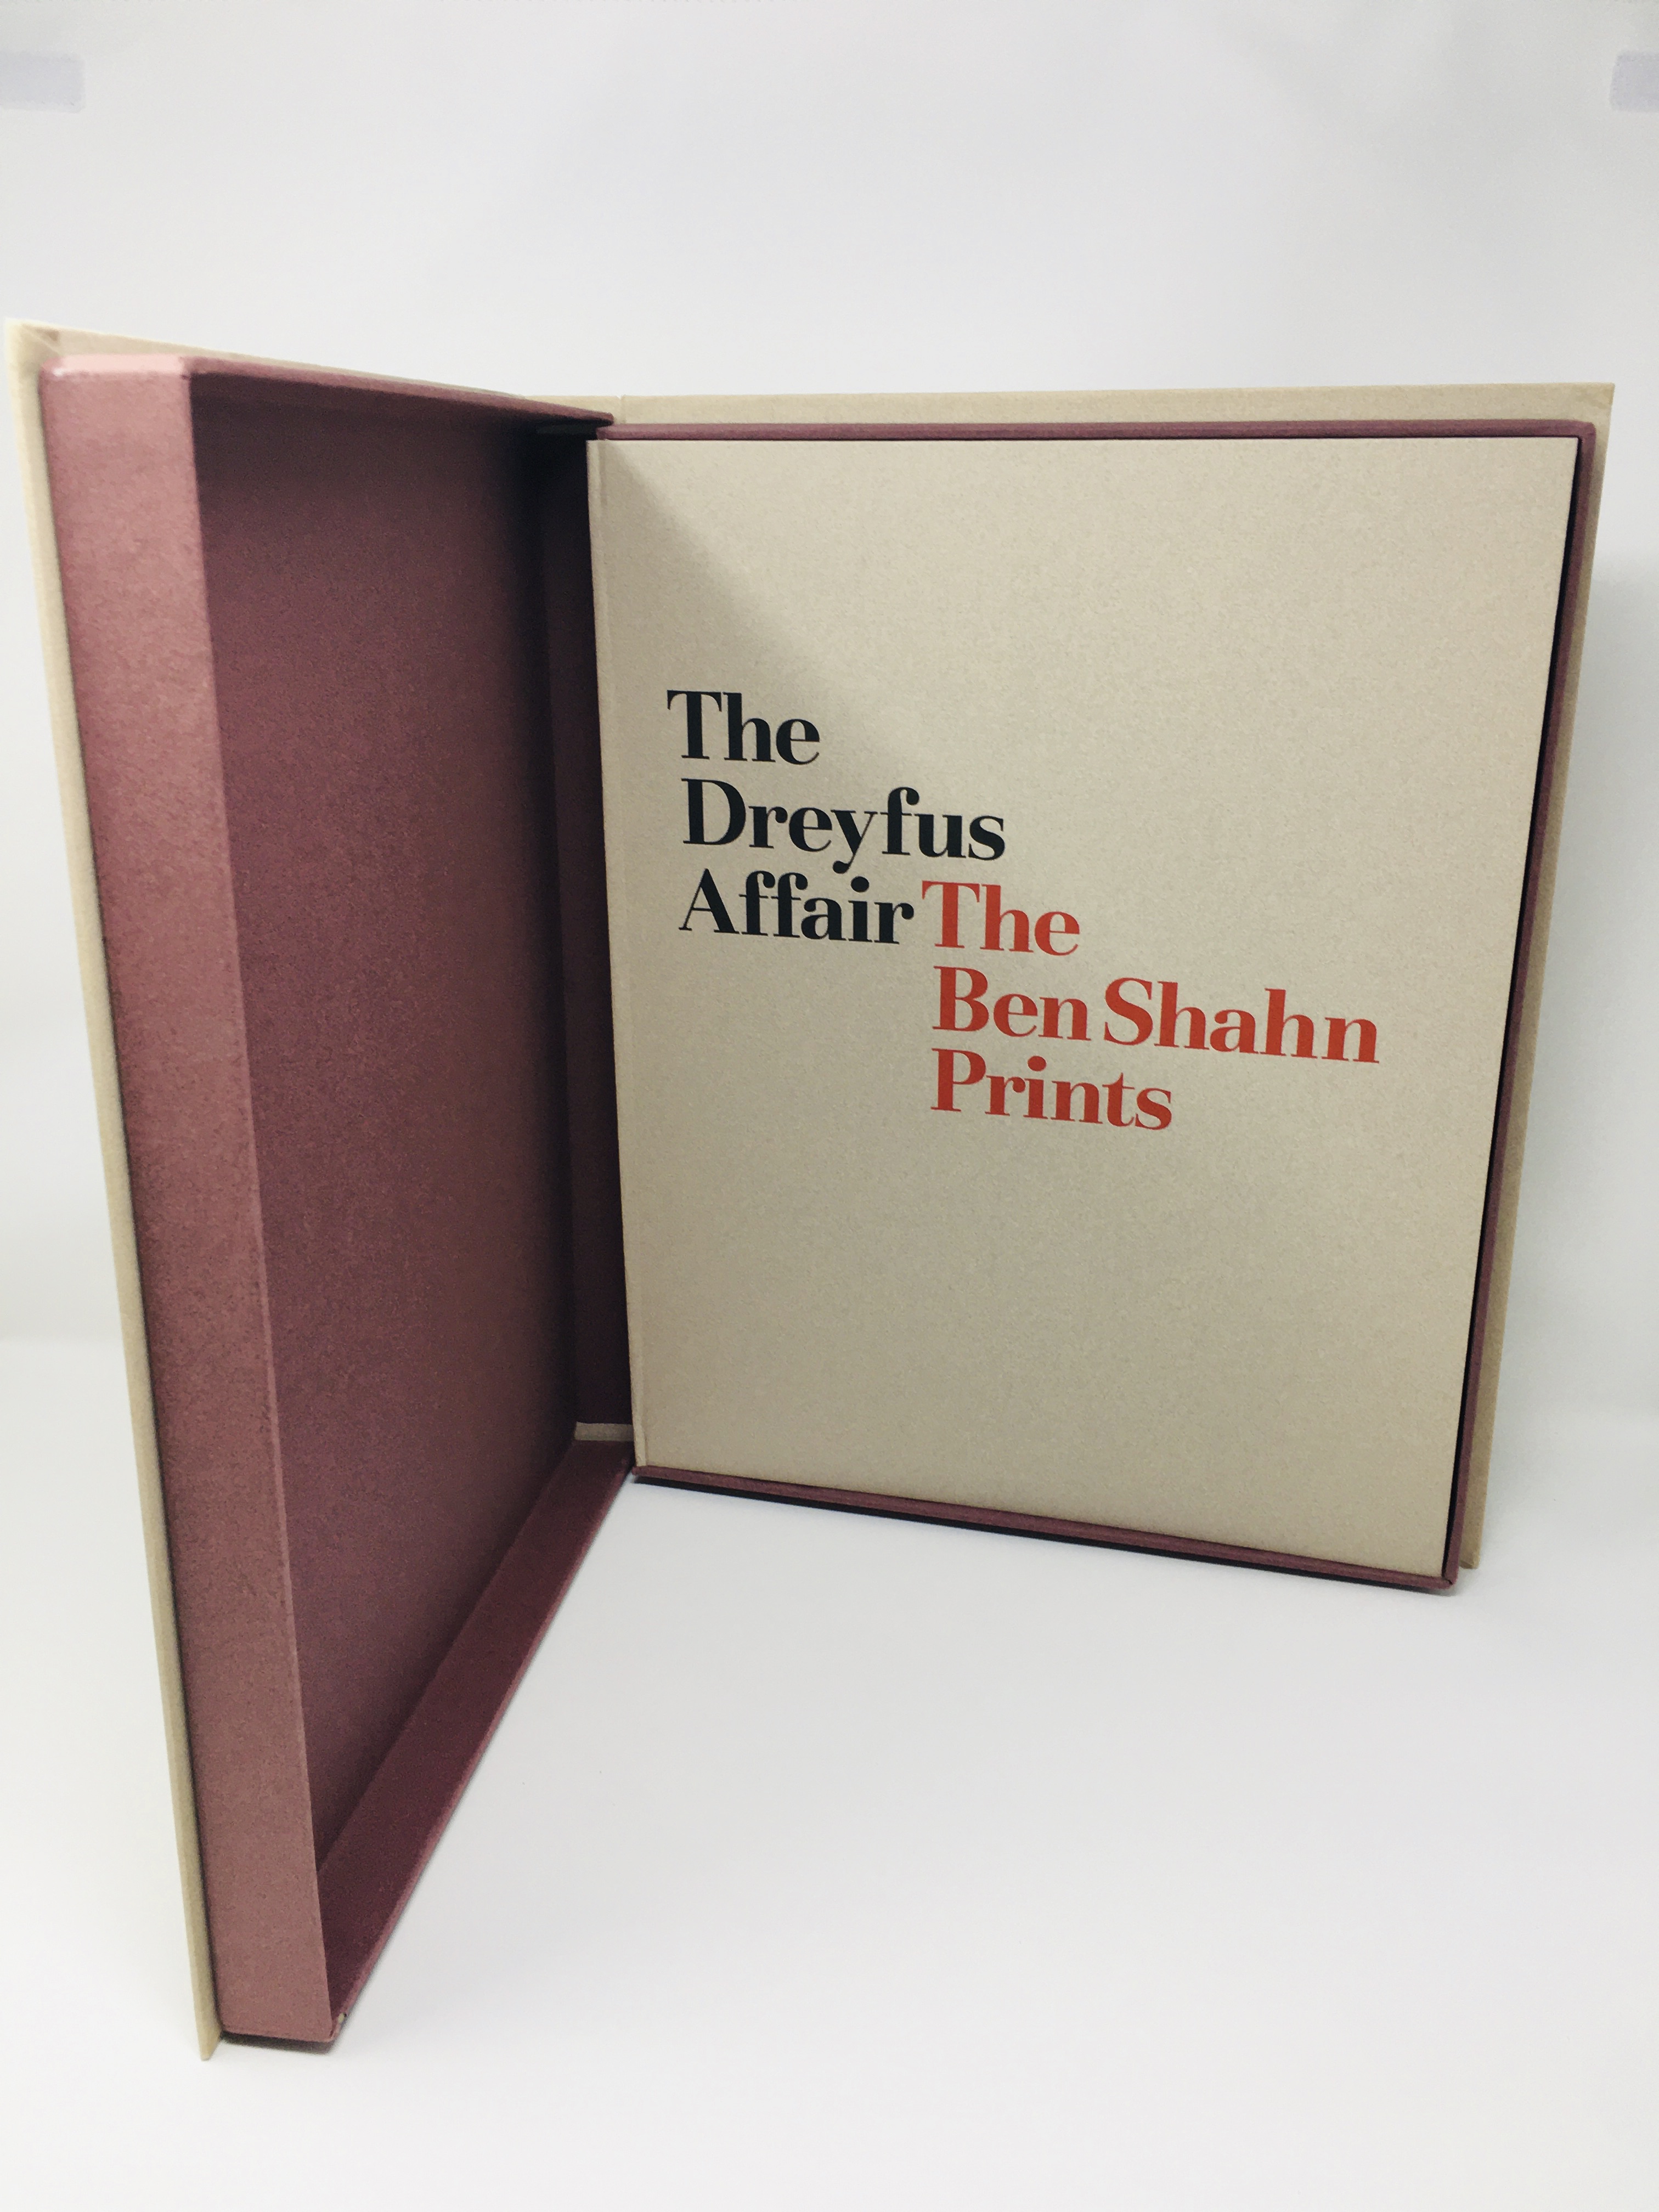 Dreyfus Affair - Book Collection featuring The Ben Shahn Prints (Limited First Edition) - Image 5 of 73